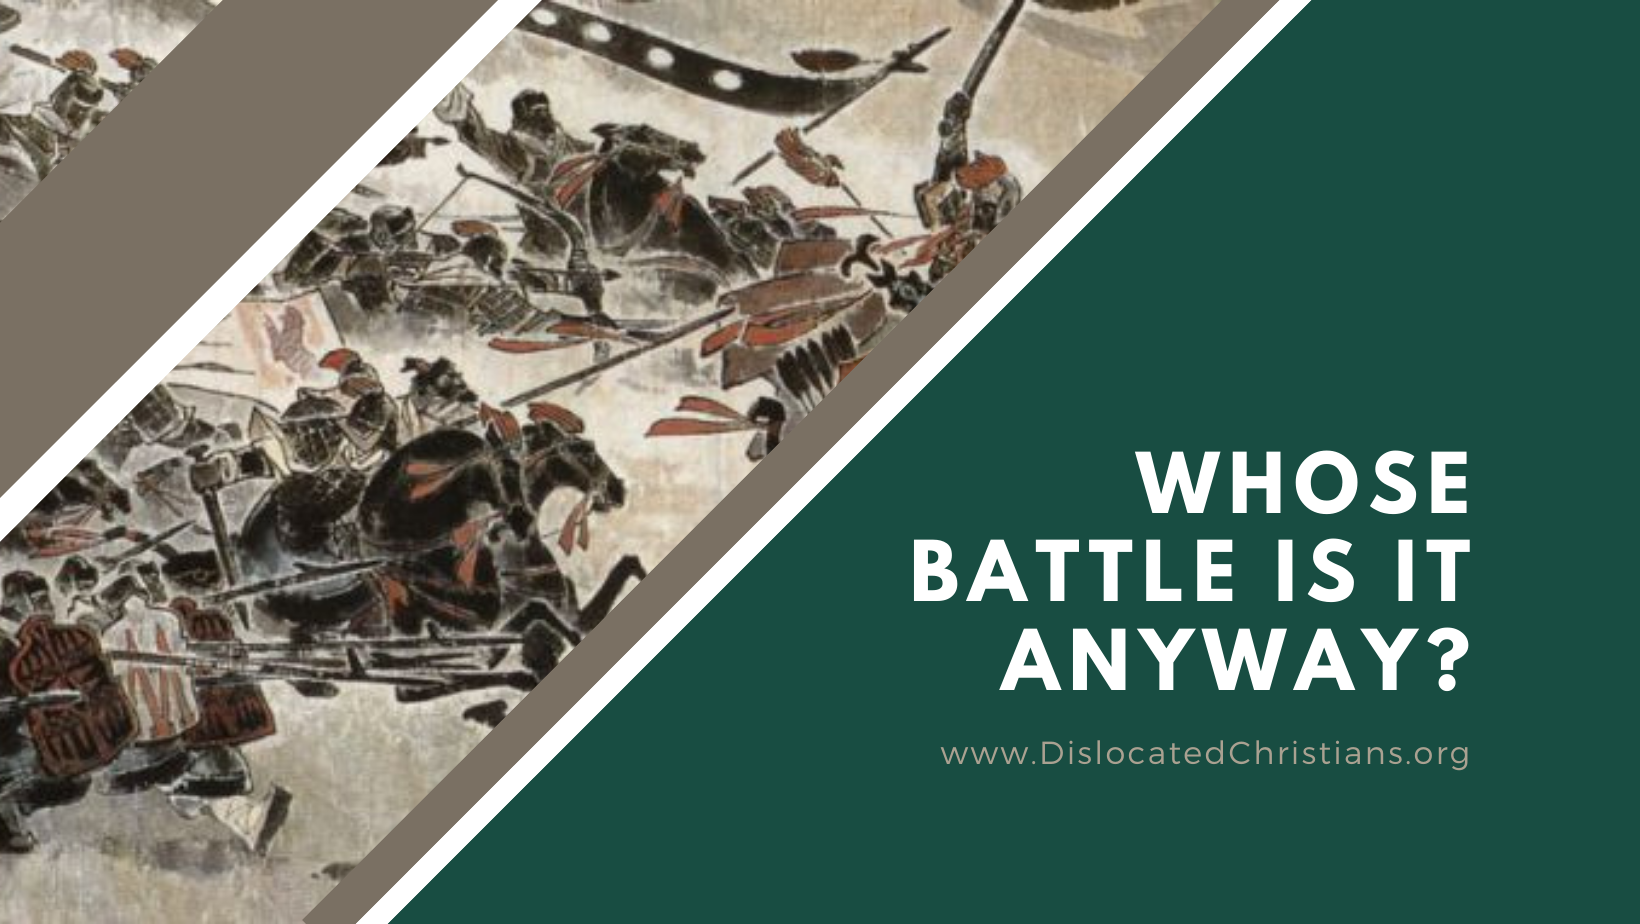 Ancient battle and question 'Whose battle is it anyway?'